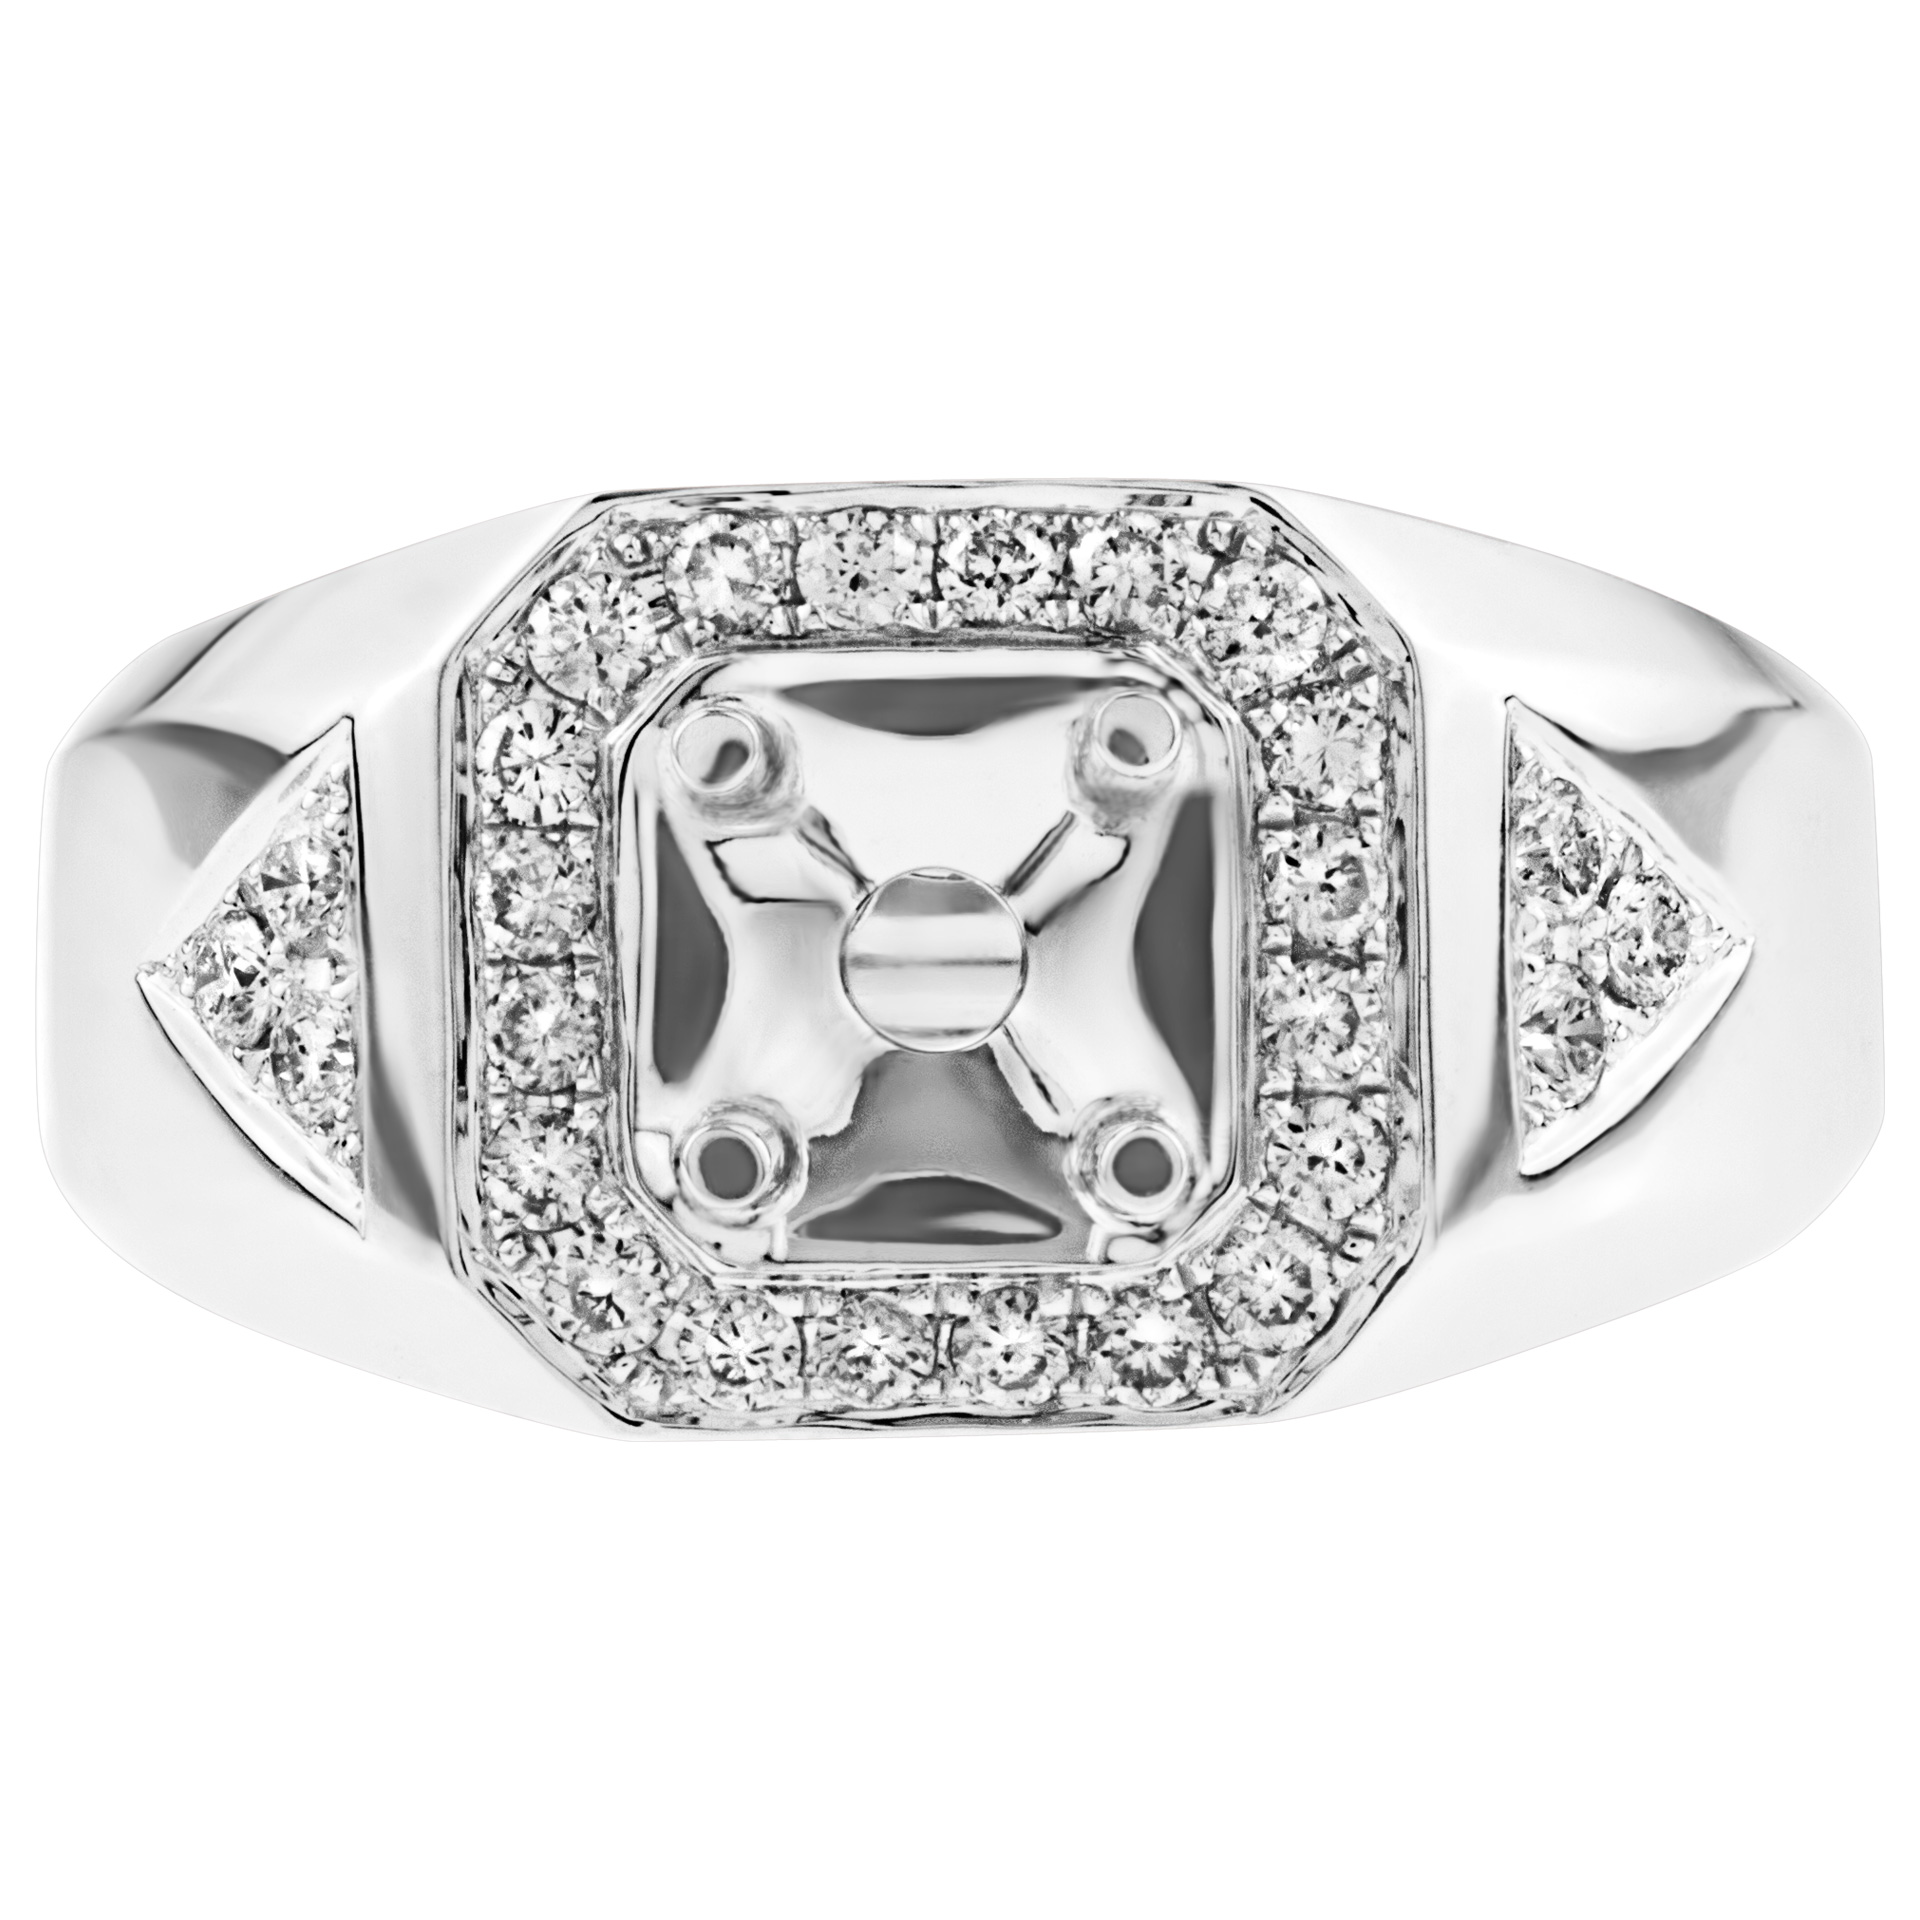 Diamond ring set in 18k white gold. 0.57 carats in round clean white diamonds image 1